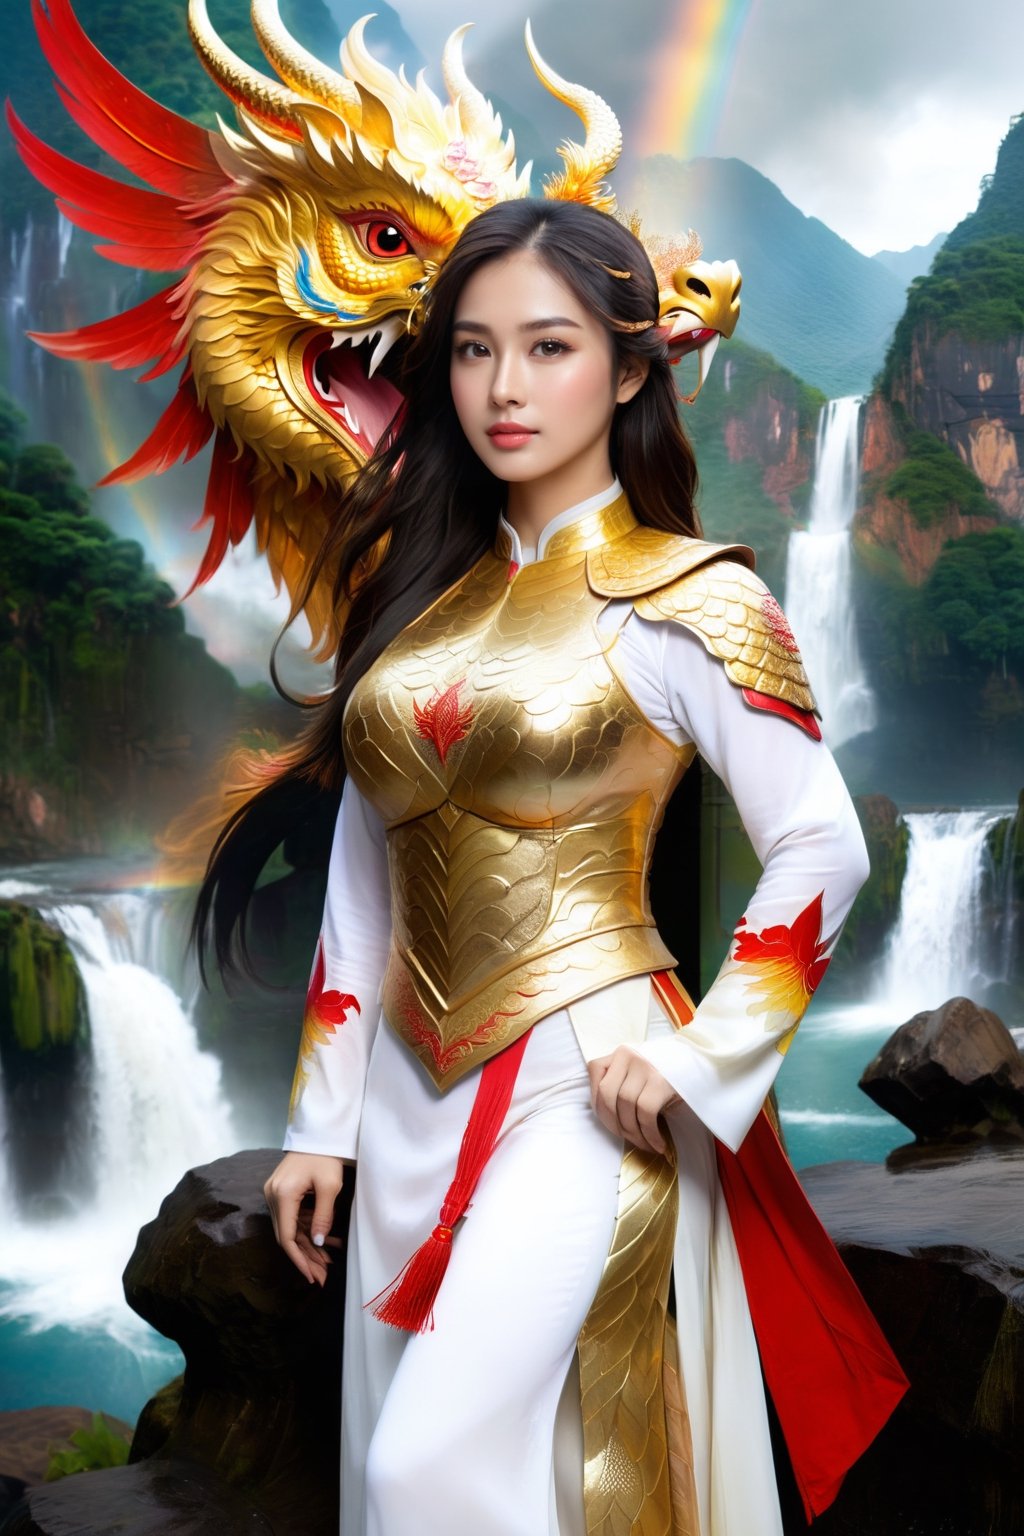 In the picture, a Vietnamese female warrior wears a white ao dai, covered with golden dragon armor, her wings are red phoenix wings. She looks straight at the lens, with high resolution and very realistic. Behind her is a majestic mountain range with a waterfall and a rainbow.